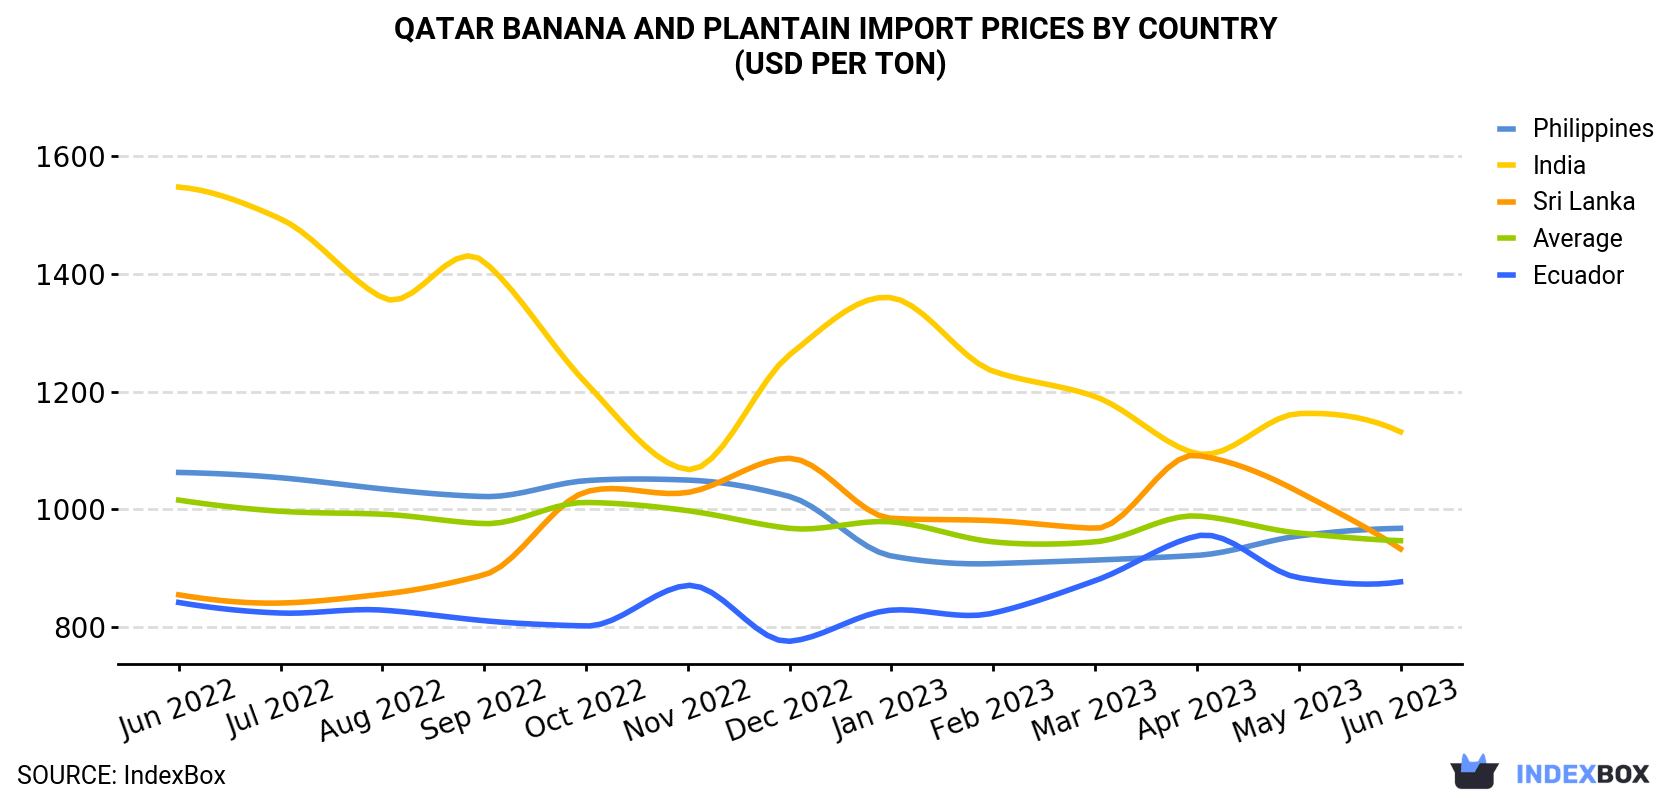 Qatar Banana and Plantain Import Prices By Country (USD Per Ton)